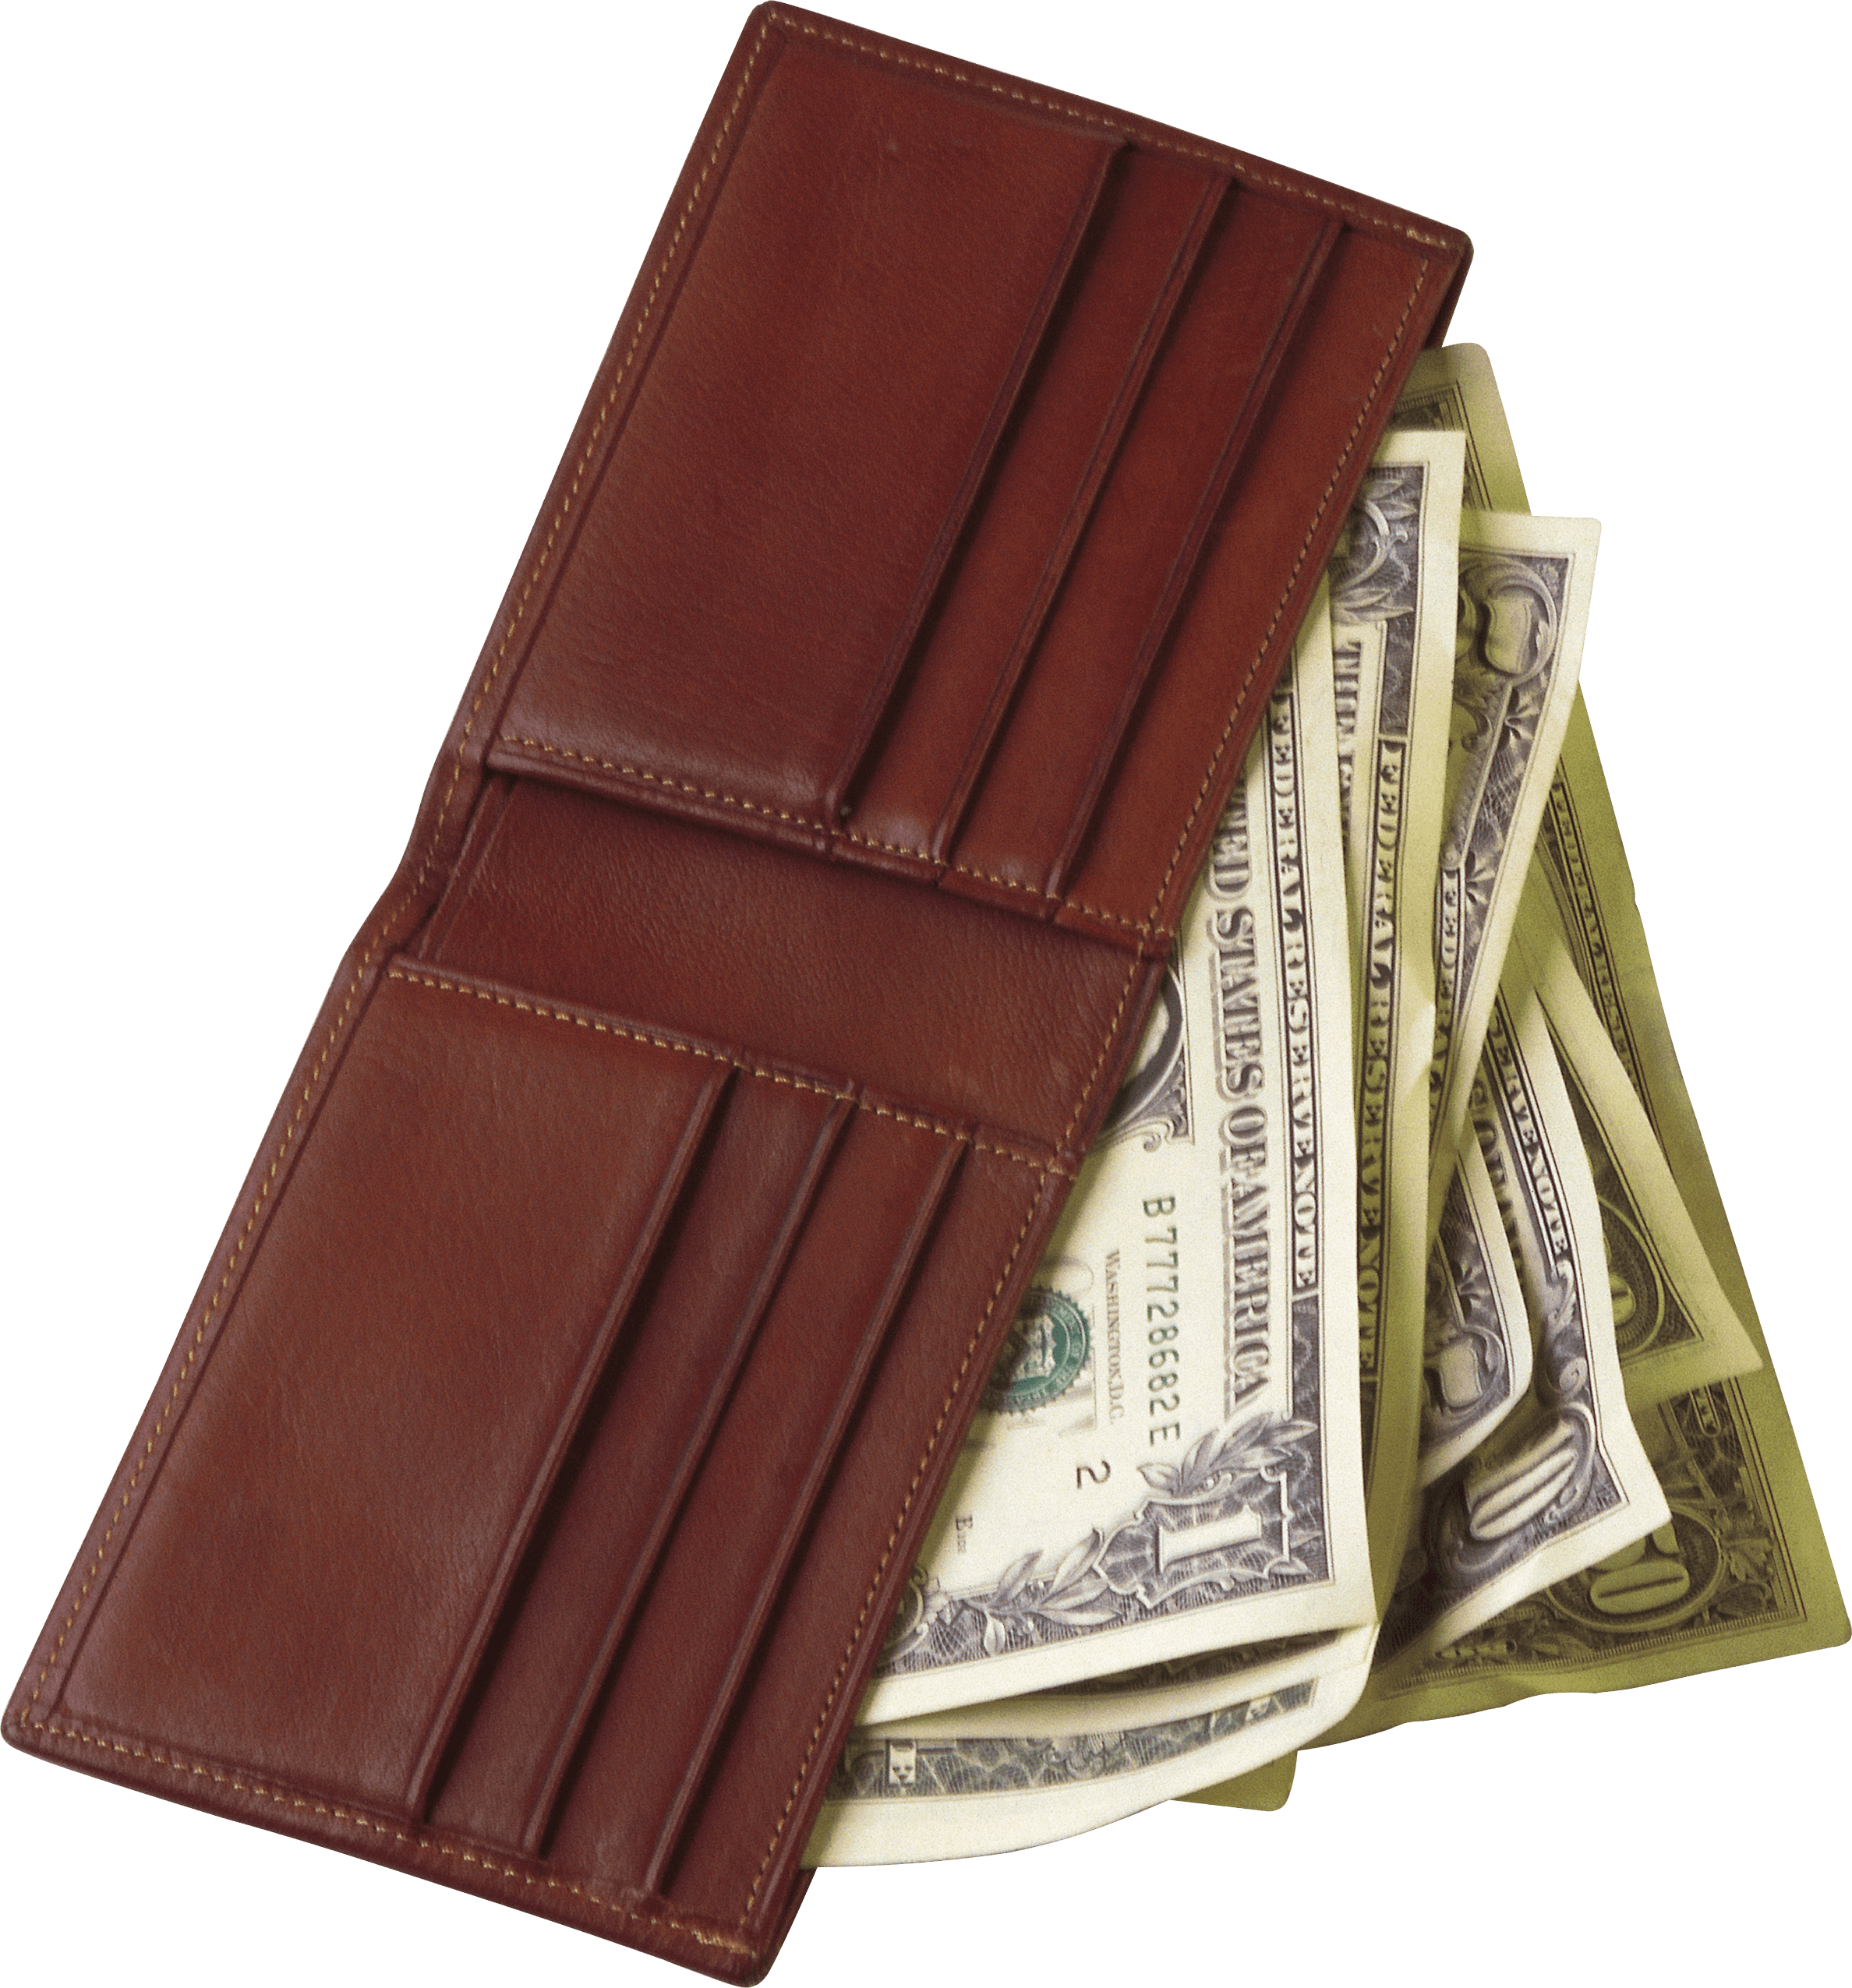 Stylish Men's Purse With Money On Wood Background. Men's Purse With Money,  Credit And Debit Cards On The Wooden Table Stock Photo, Picture and Royalty  Free Image. Image 143903119.